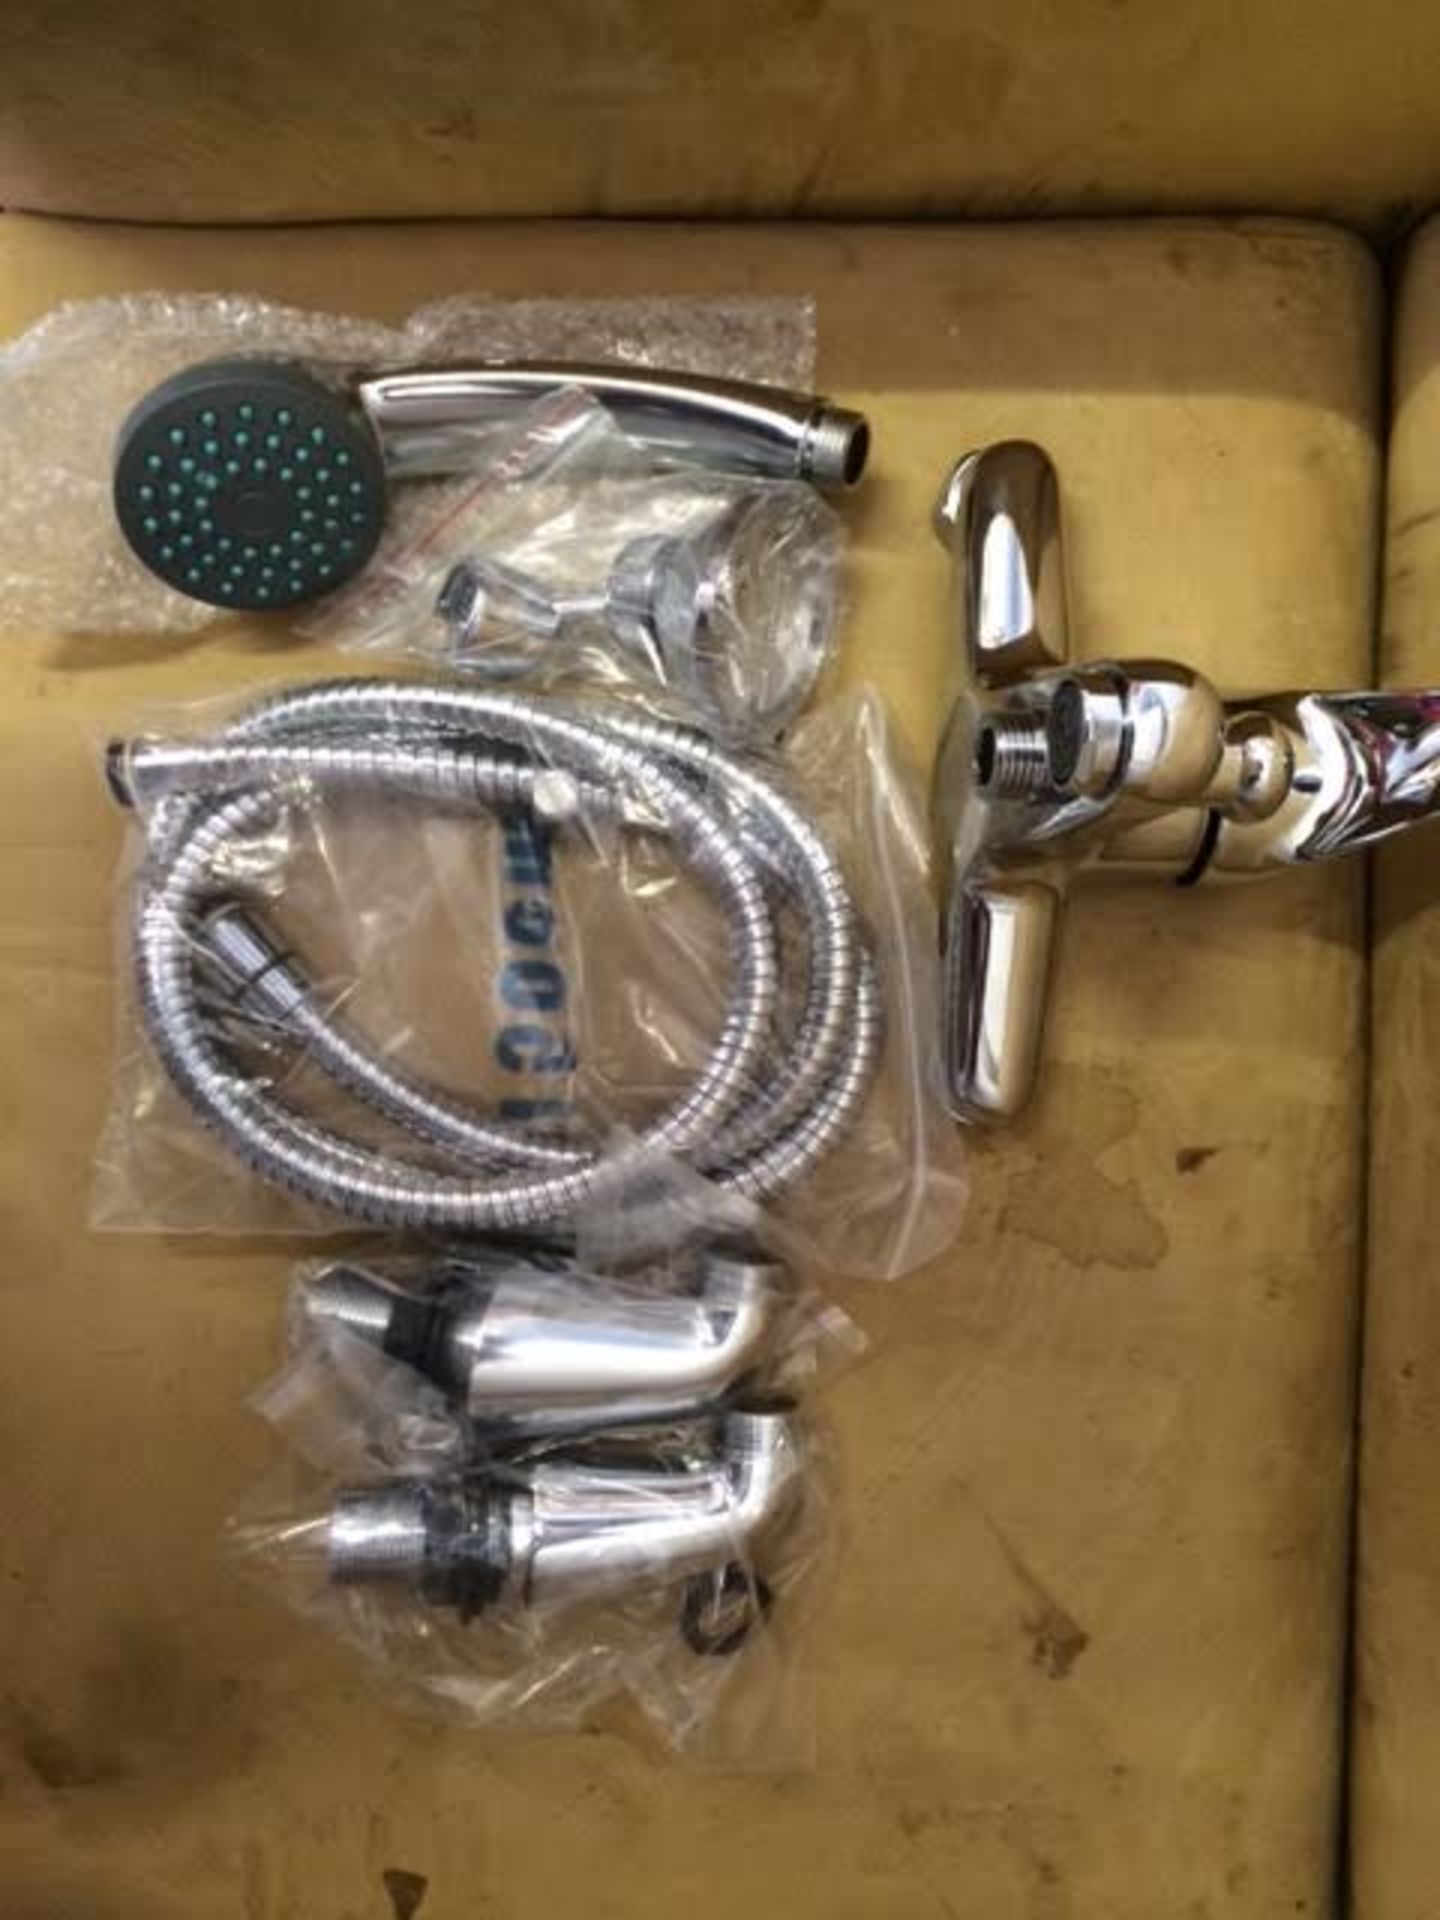 Bath shower mixer tap comes with legs, hose, shower head, wall bracket Appraisal: New / Good - Image 2 of 2